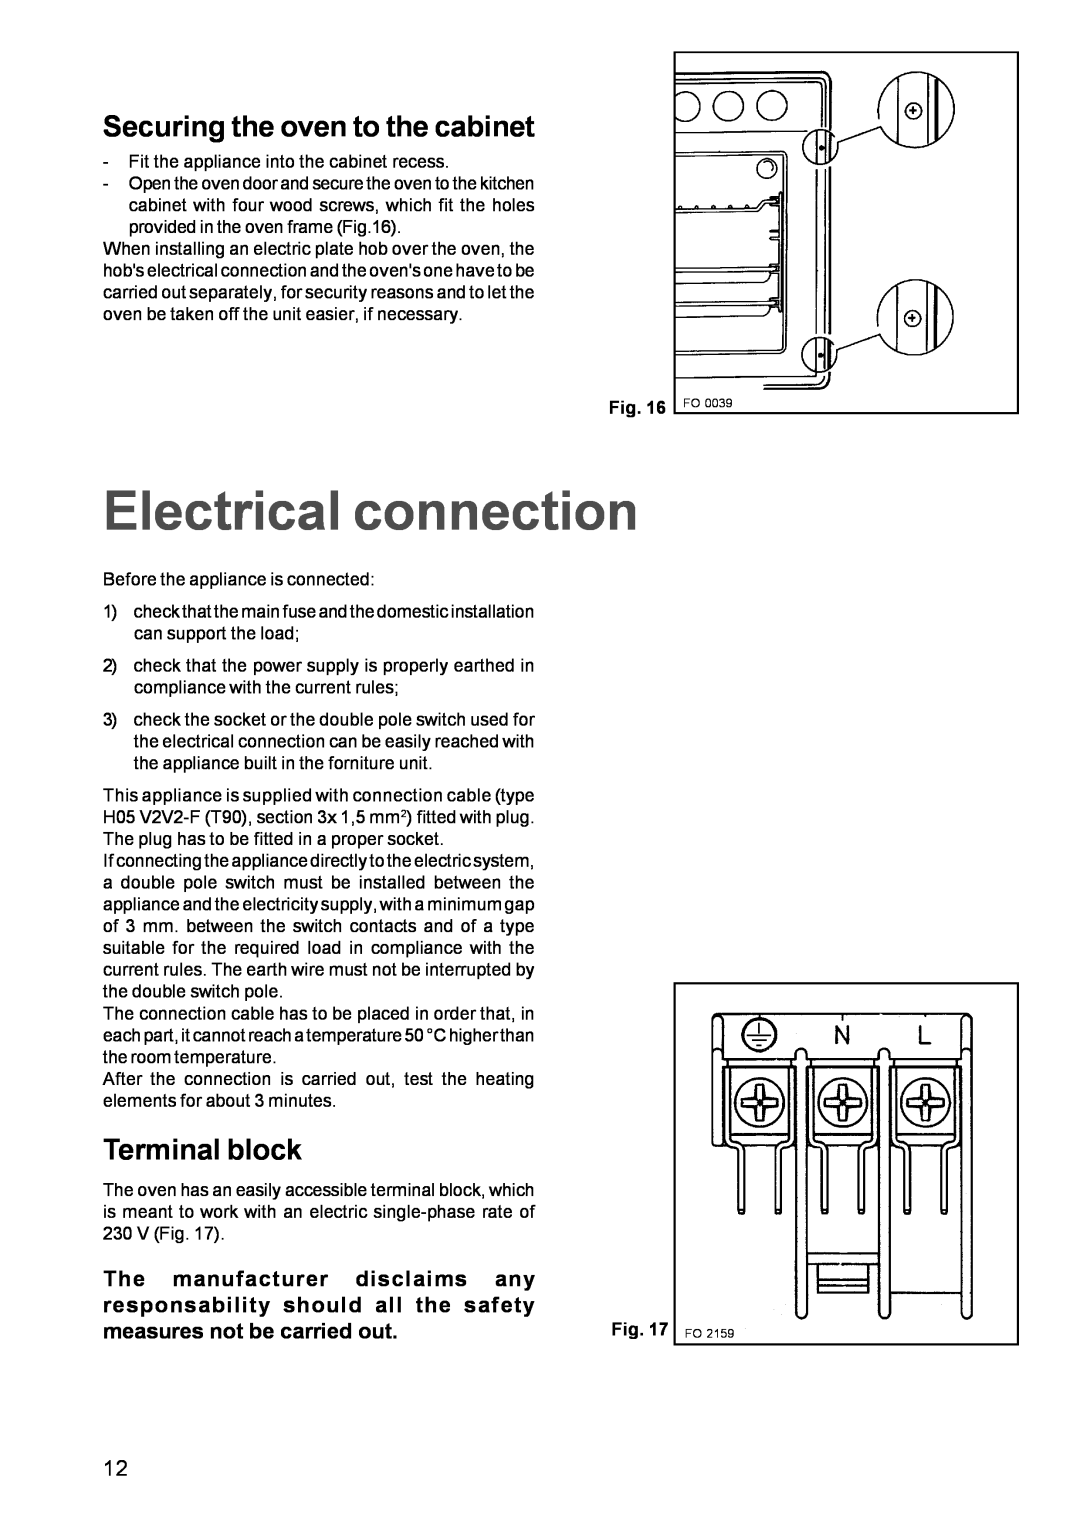 Zanussi ZBS 869 manual Electrical connection, Securing the oven to the cabinet, Terminal block, The manufacturer disclaims 